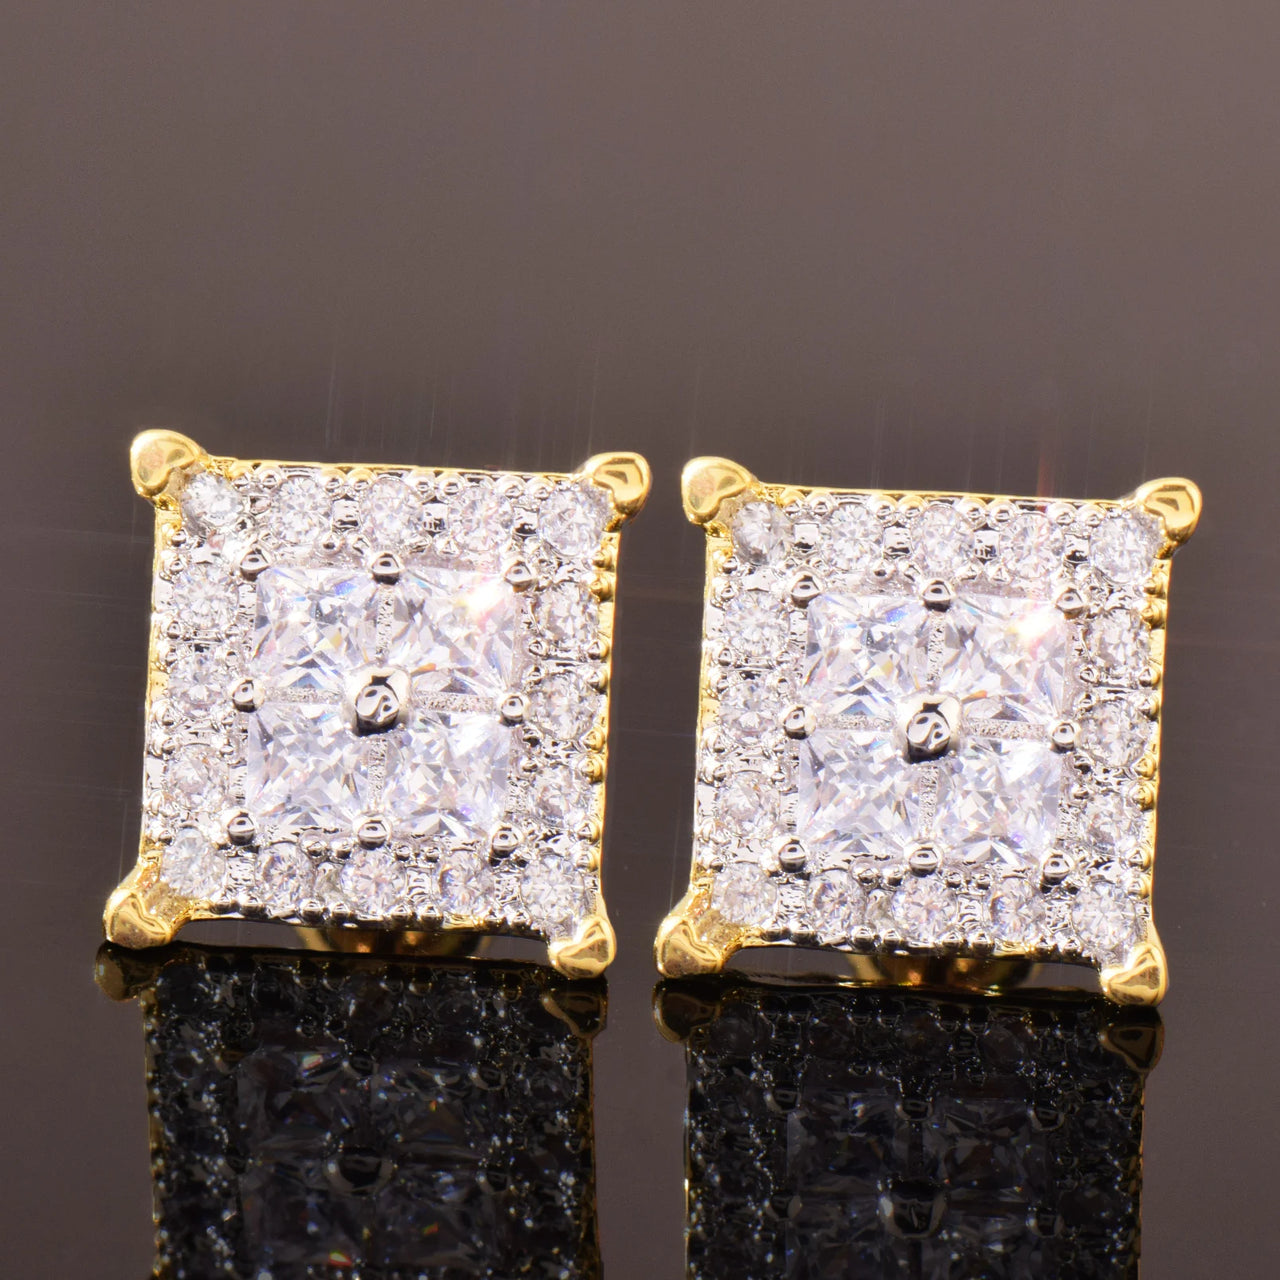 10mm Square Cut Clustered Earrings - Different Drips